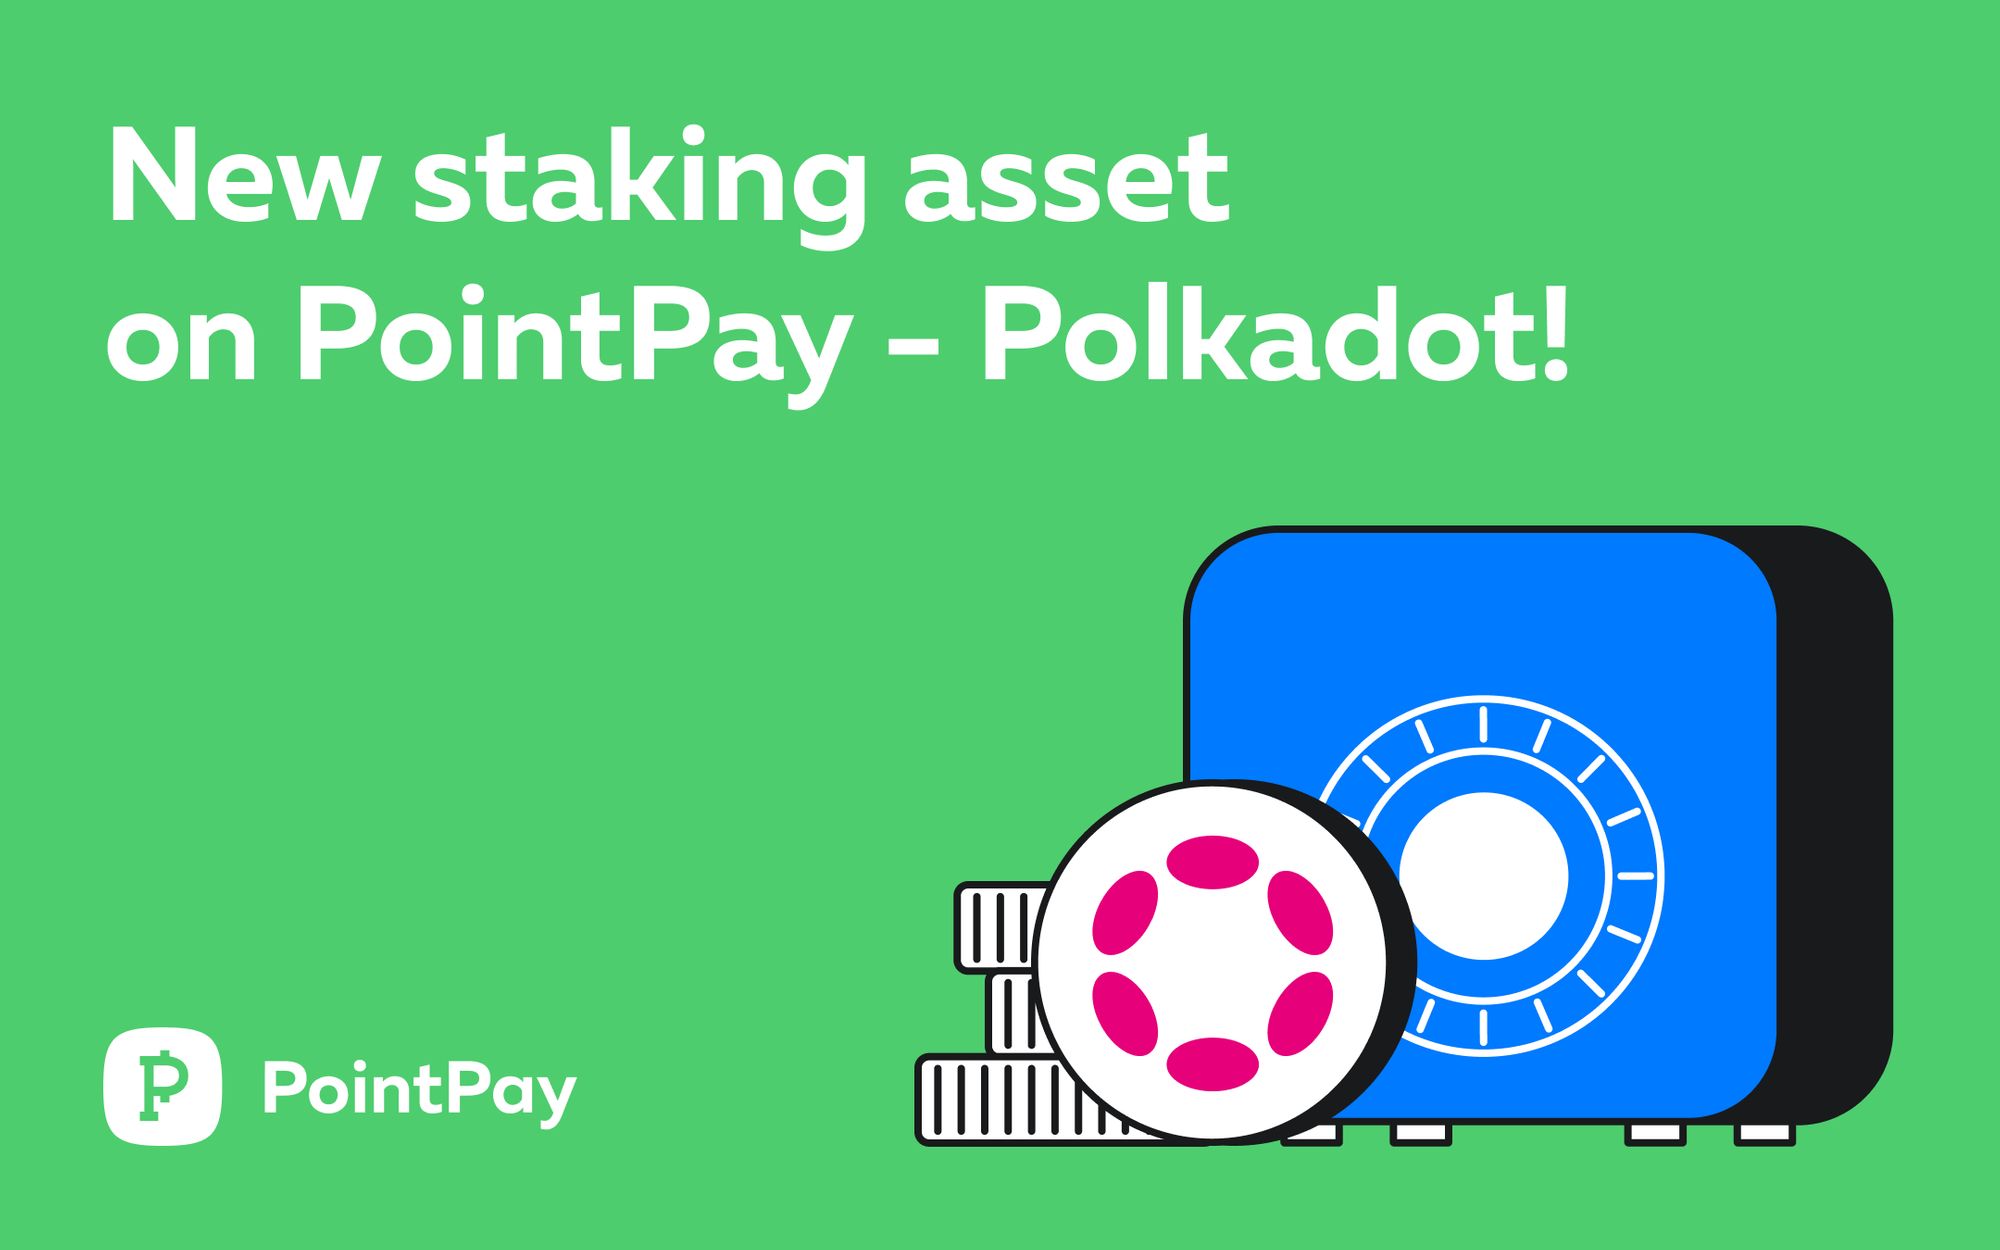 Introduce Polkadot staking on PointPay!